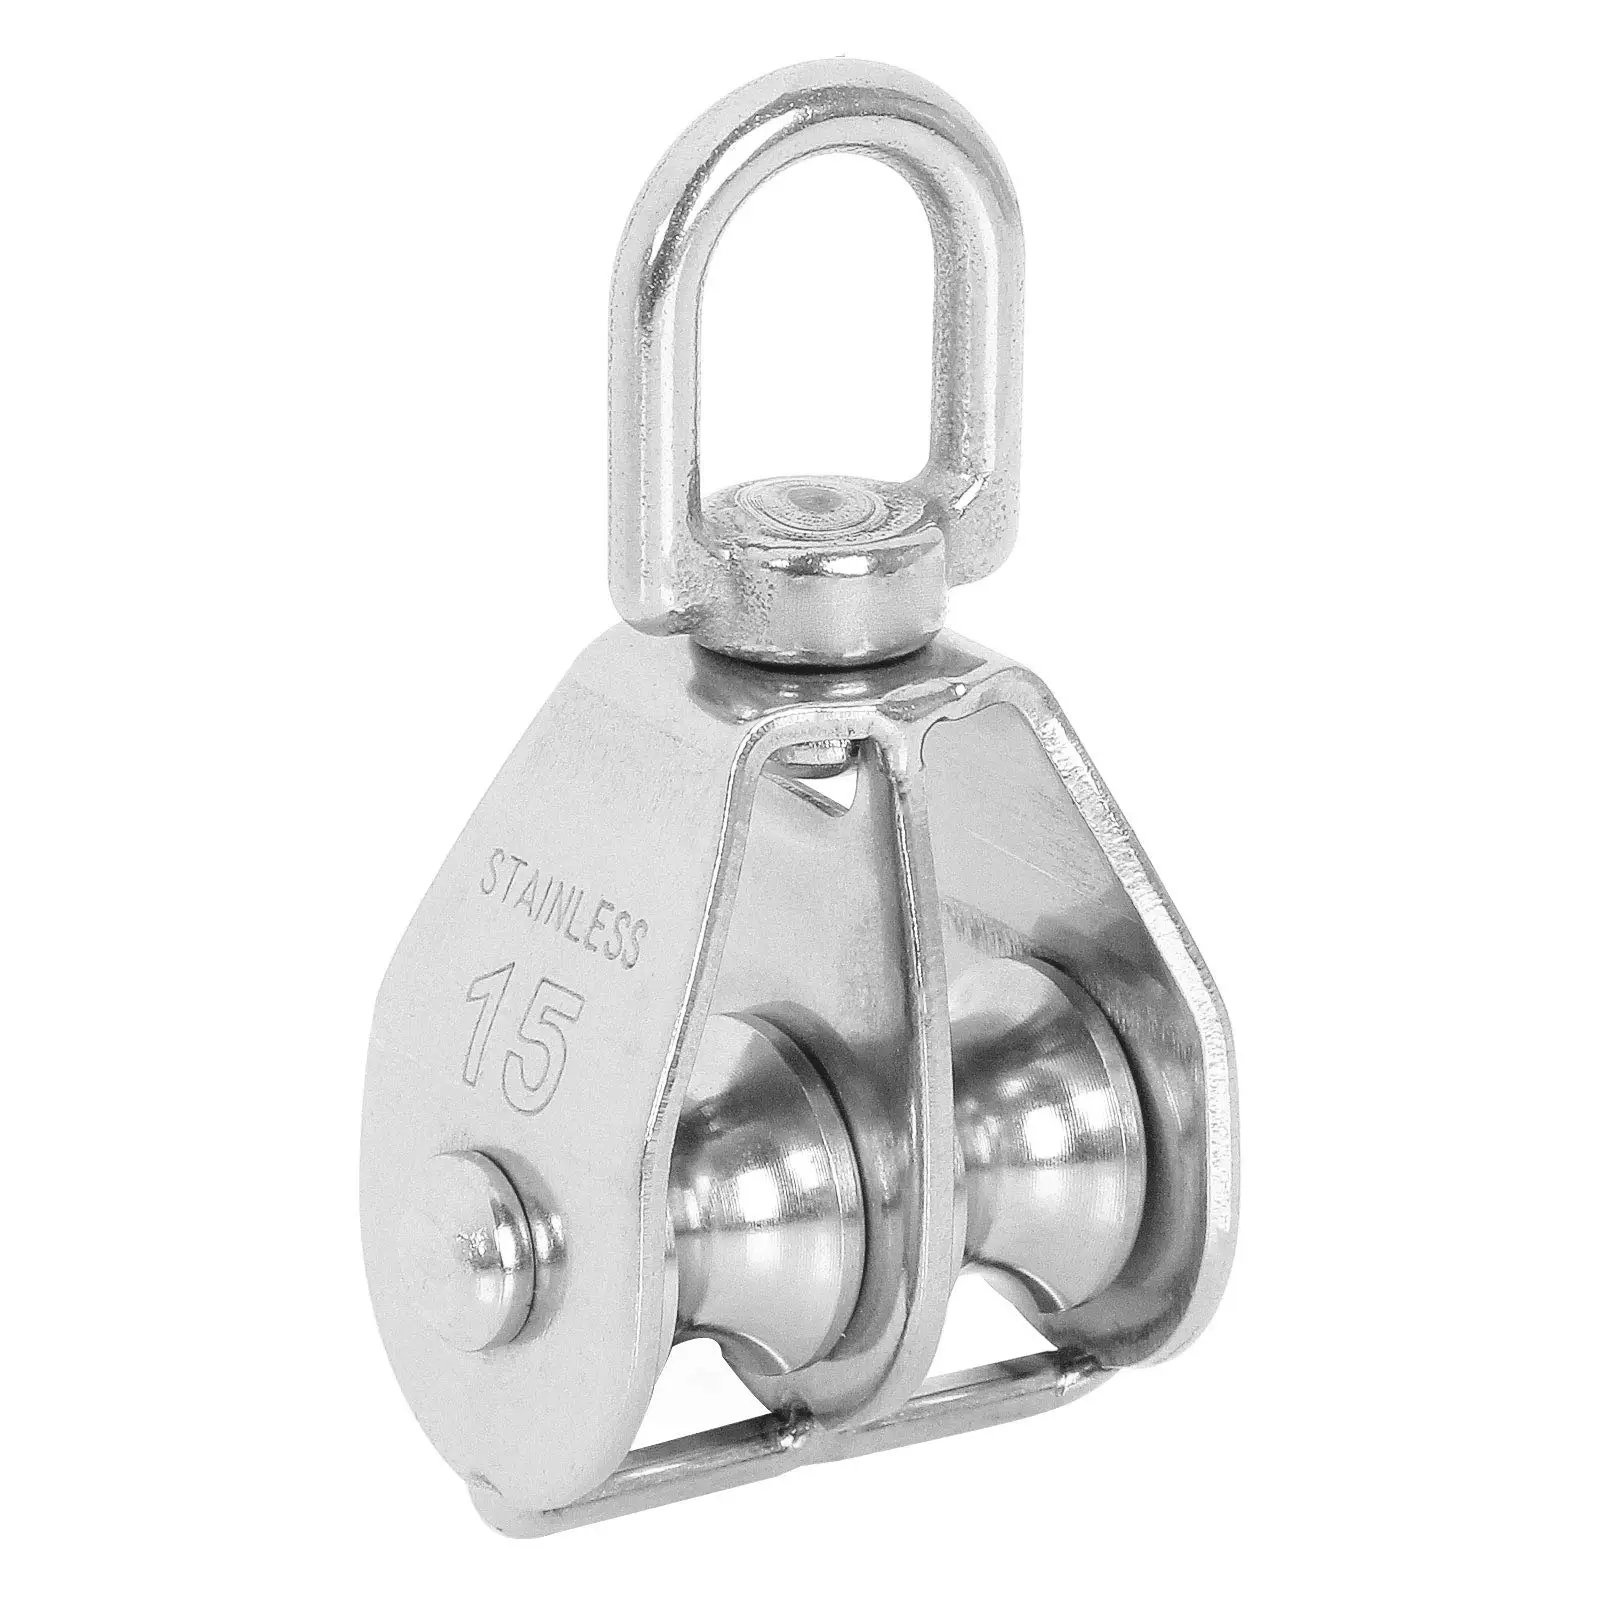 Double Pulley Block Hanging Wire Pulley Roller 304 Stainless Steel Heavy Duty Double Wheel Block Pulley for Lifting Rope (M15) 6 pcs of m32 pulley block flyinghigh 304 stainless steel lifting crane swivel hook single pulley block hanging wire towing whe